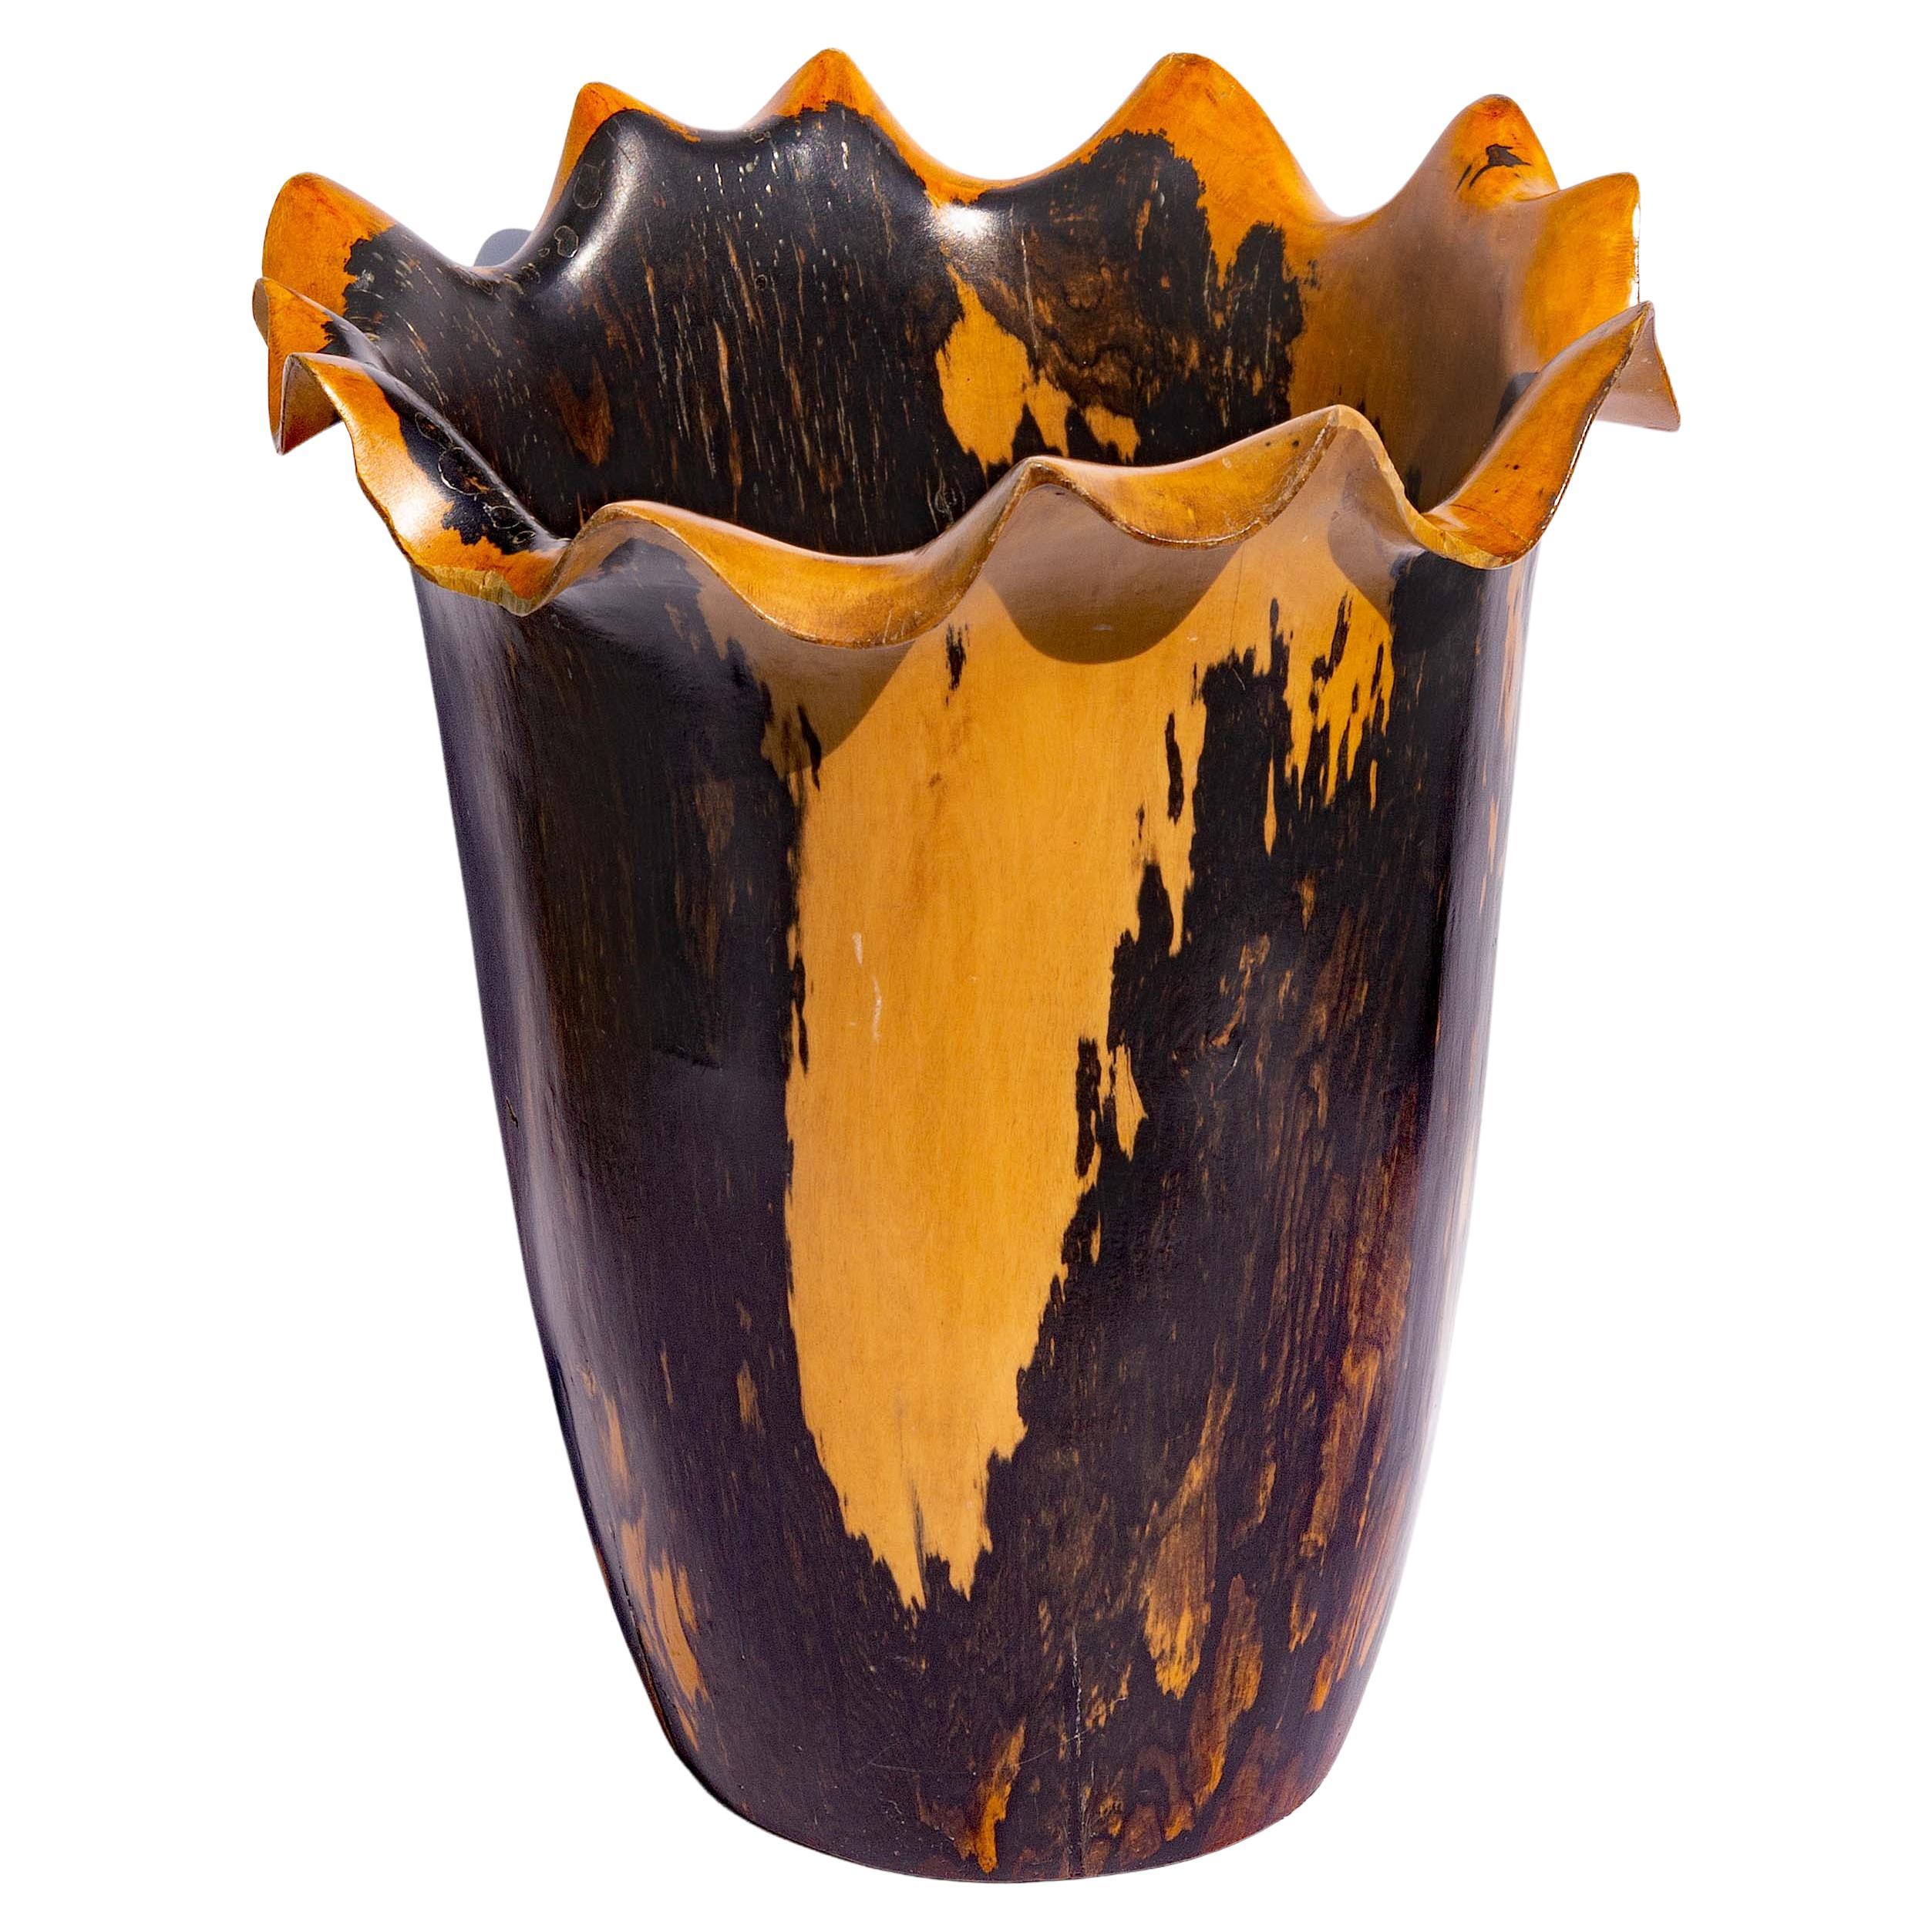 Cocobolo Vases and Vessels